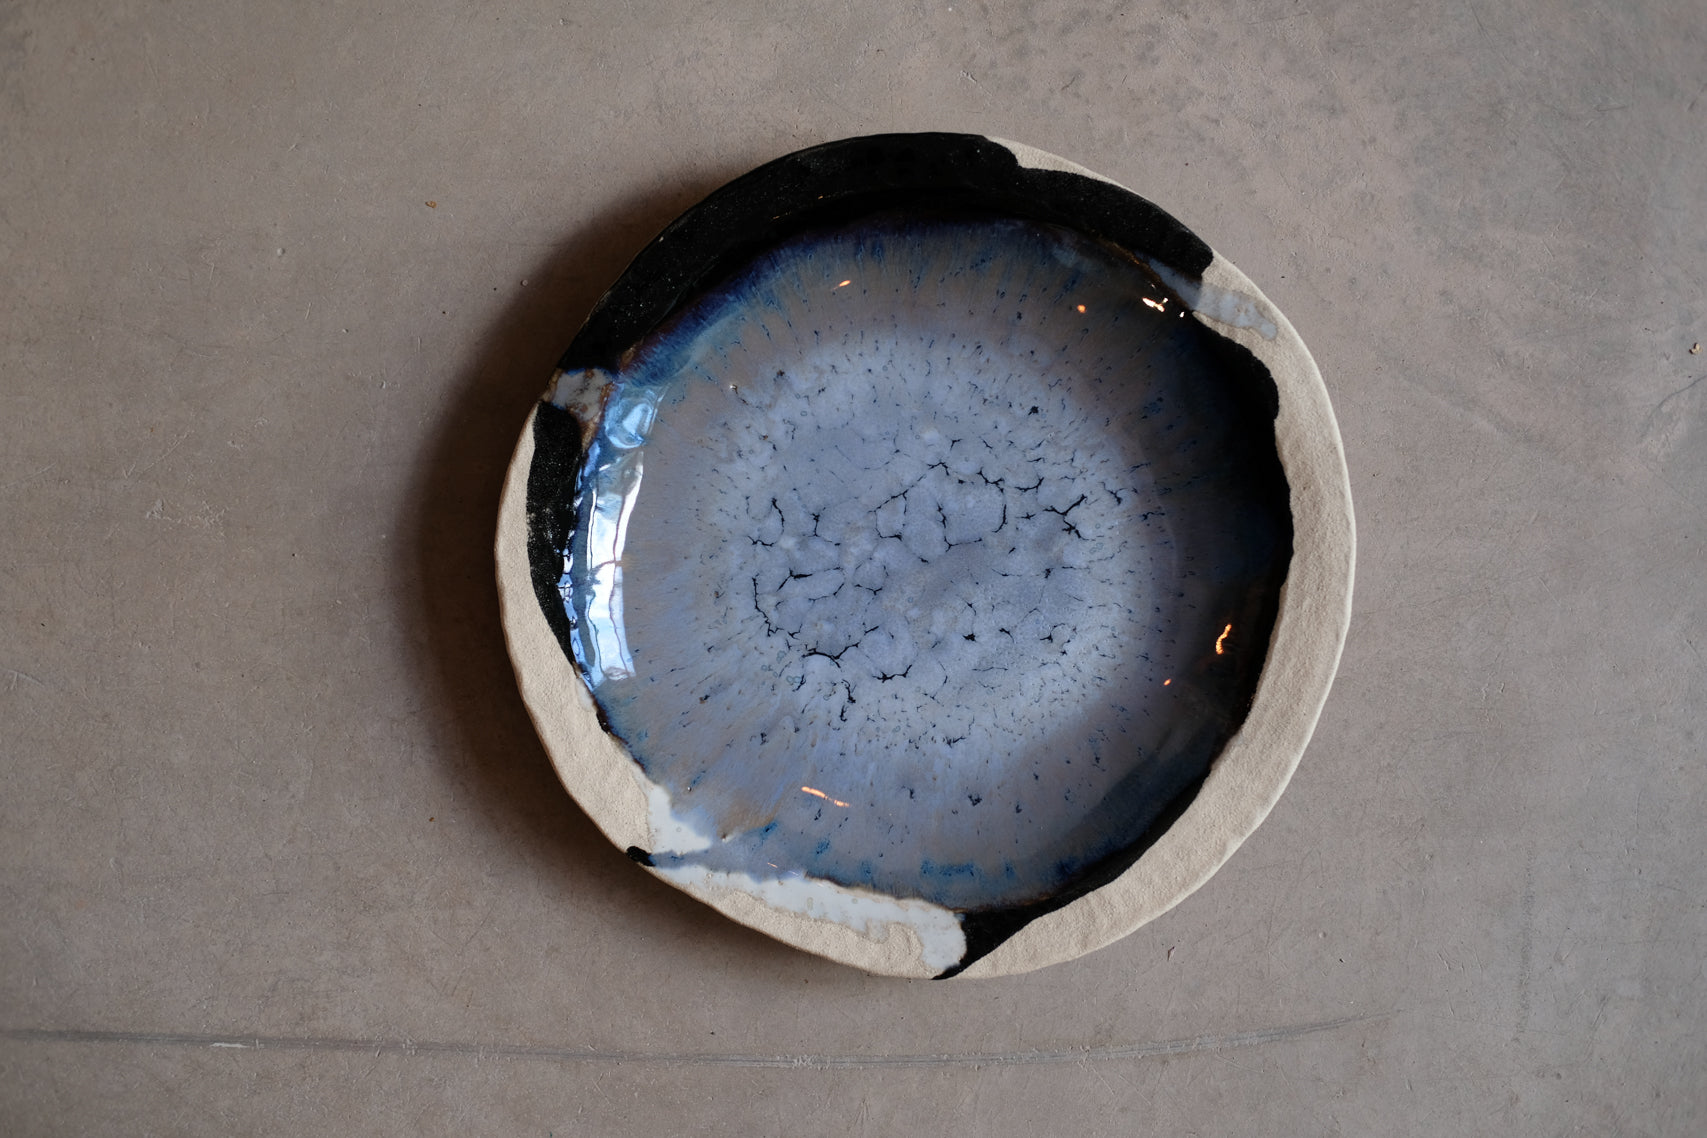 Meeting and interview with ceramist Lola Moreau on Brutal Ceramics